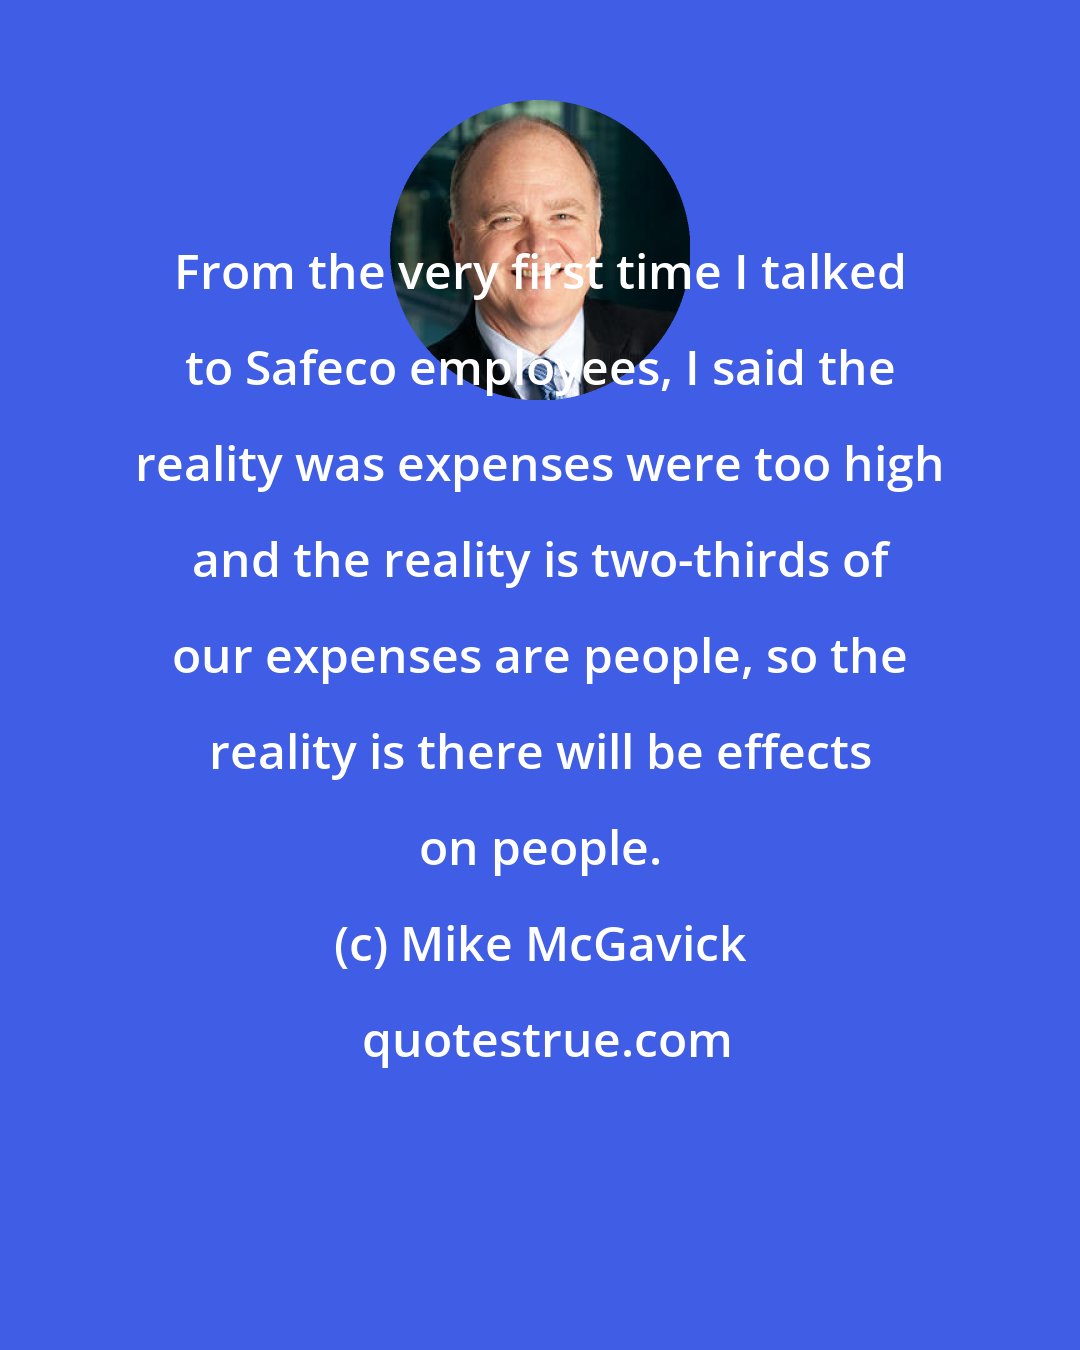 Mike McGavick: From the very first time I talked to Safeco employees, I said the reality was expenses were too high and the reality is two-thirds of our expenses are people, so the reality is there will be effects on people.